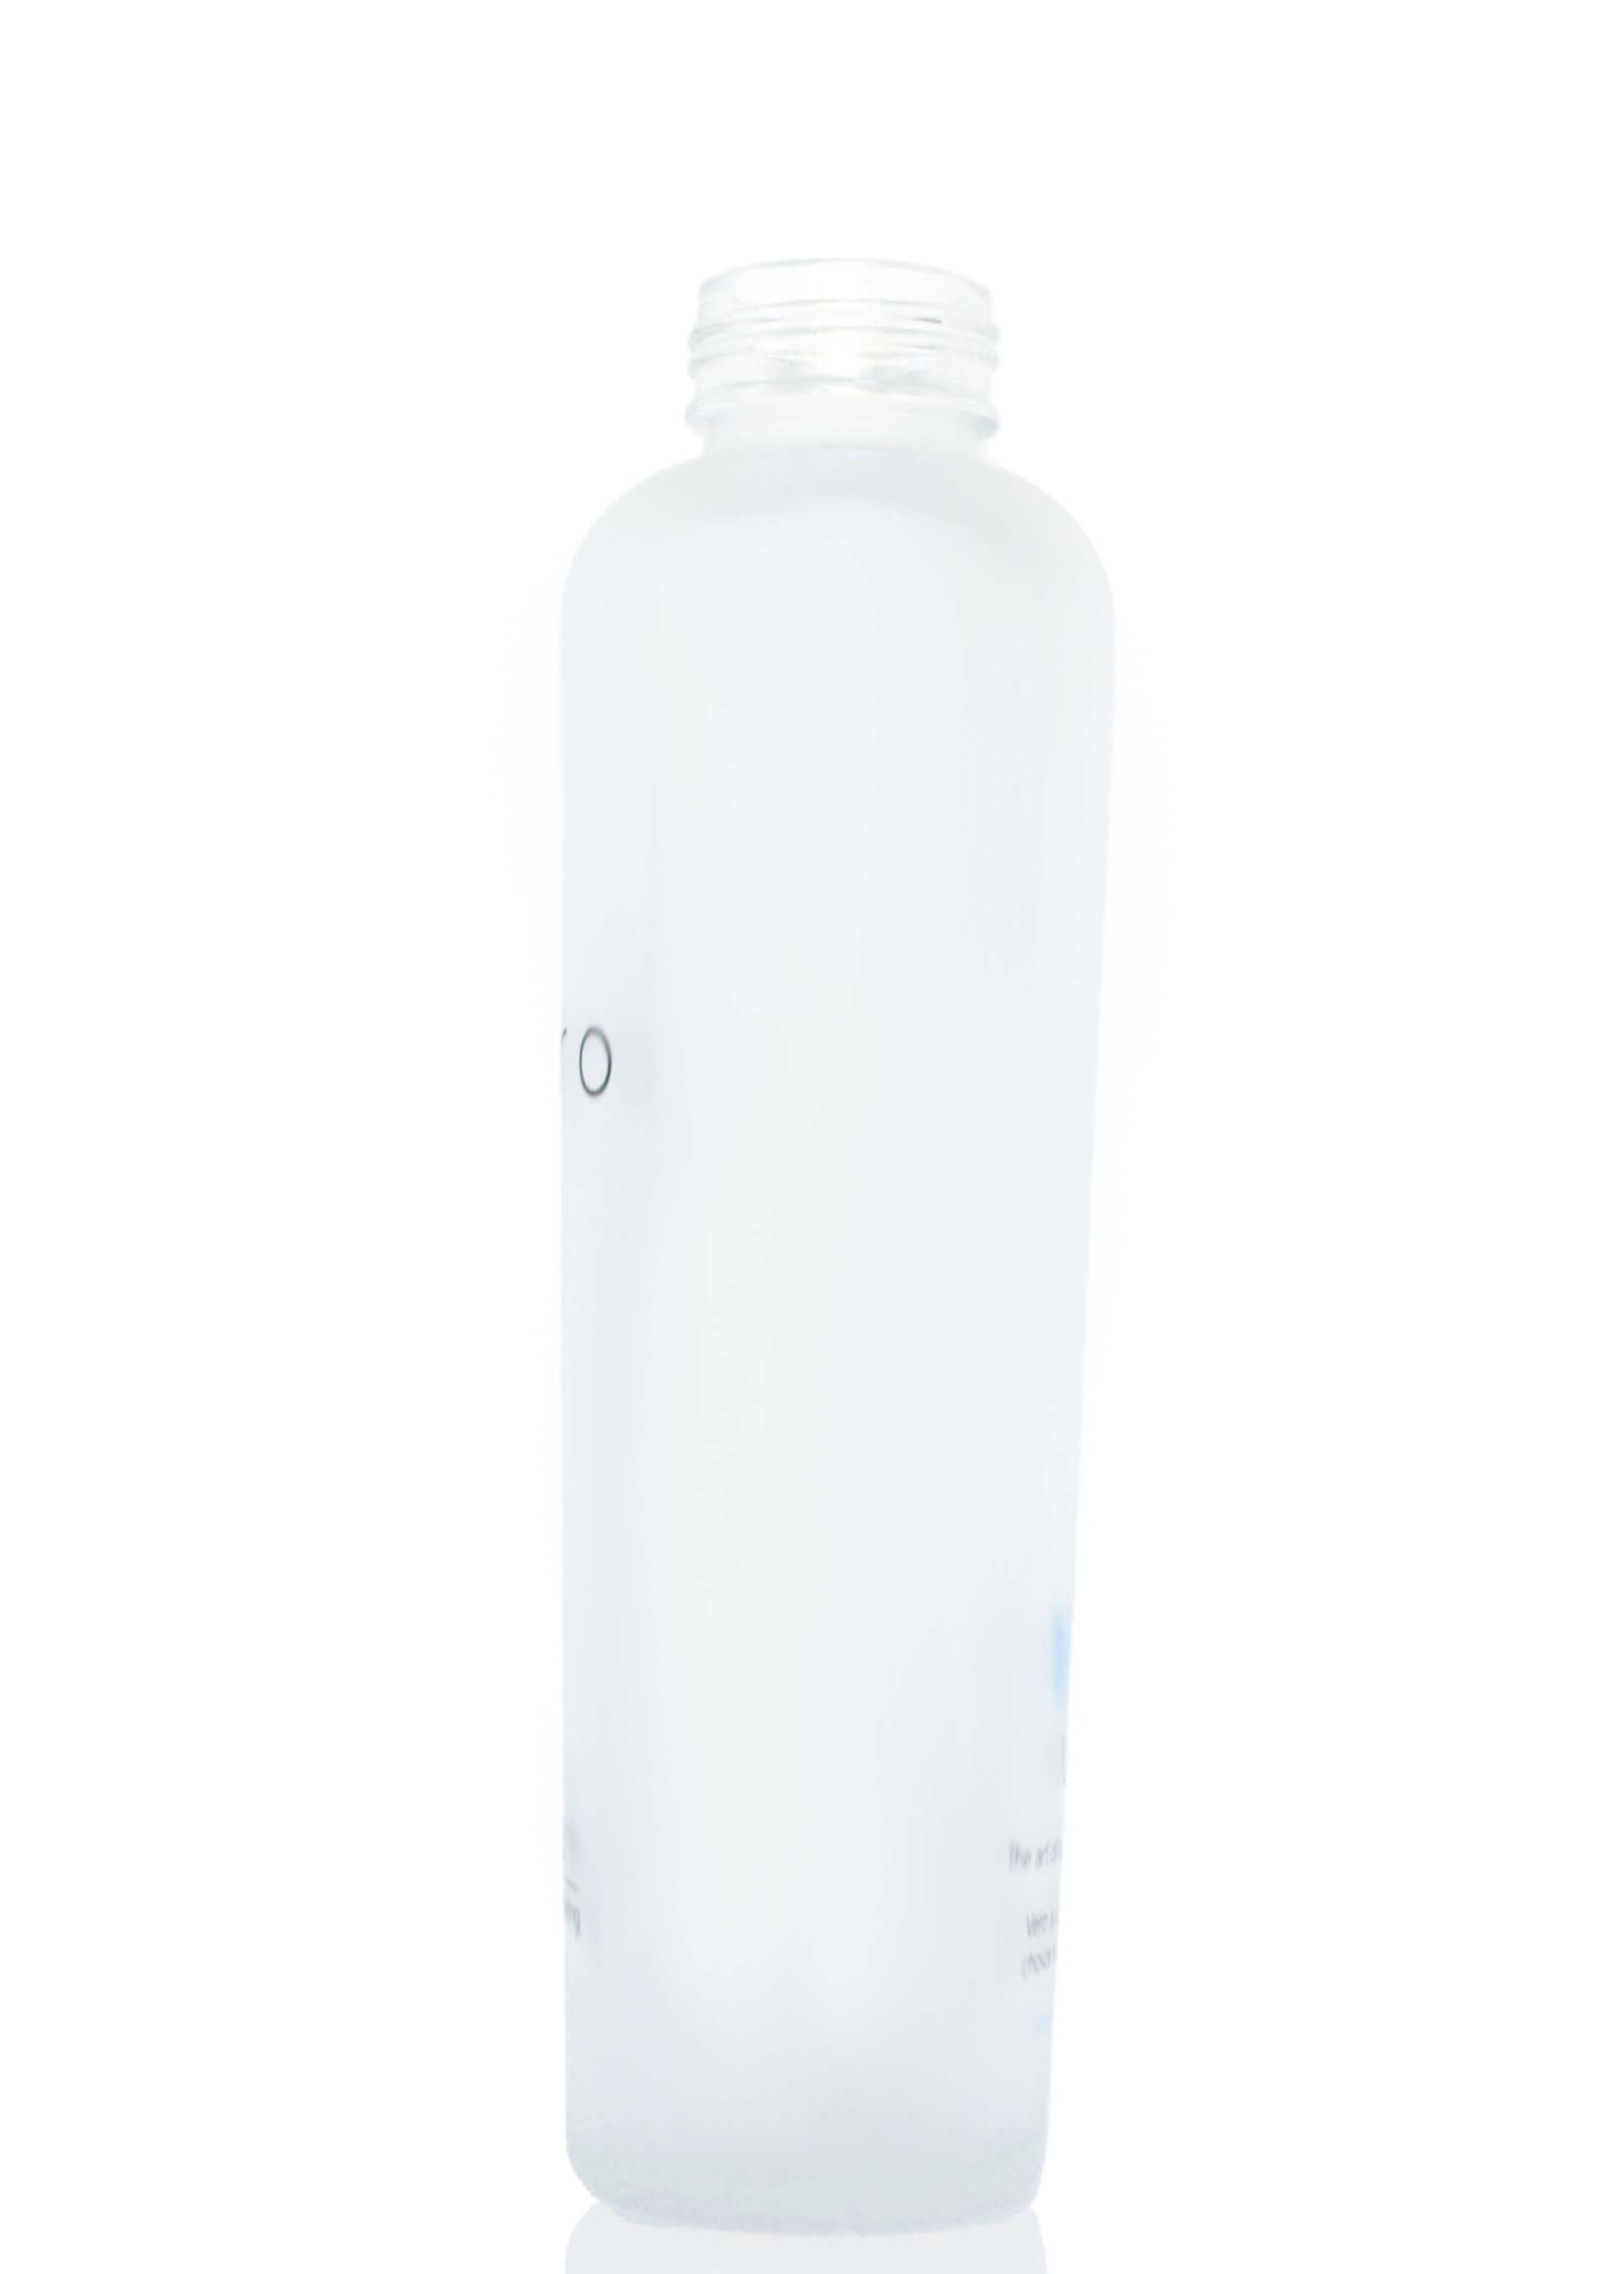 Frosted empty glass bottles wholesale